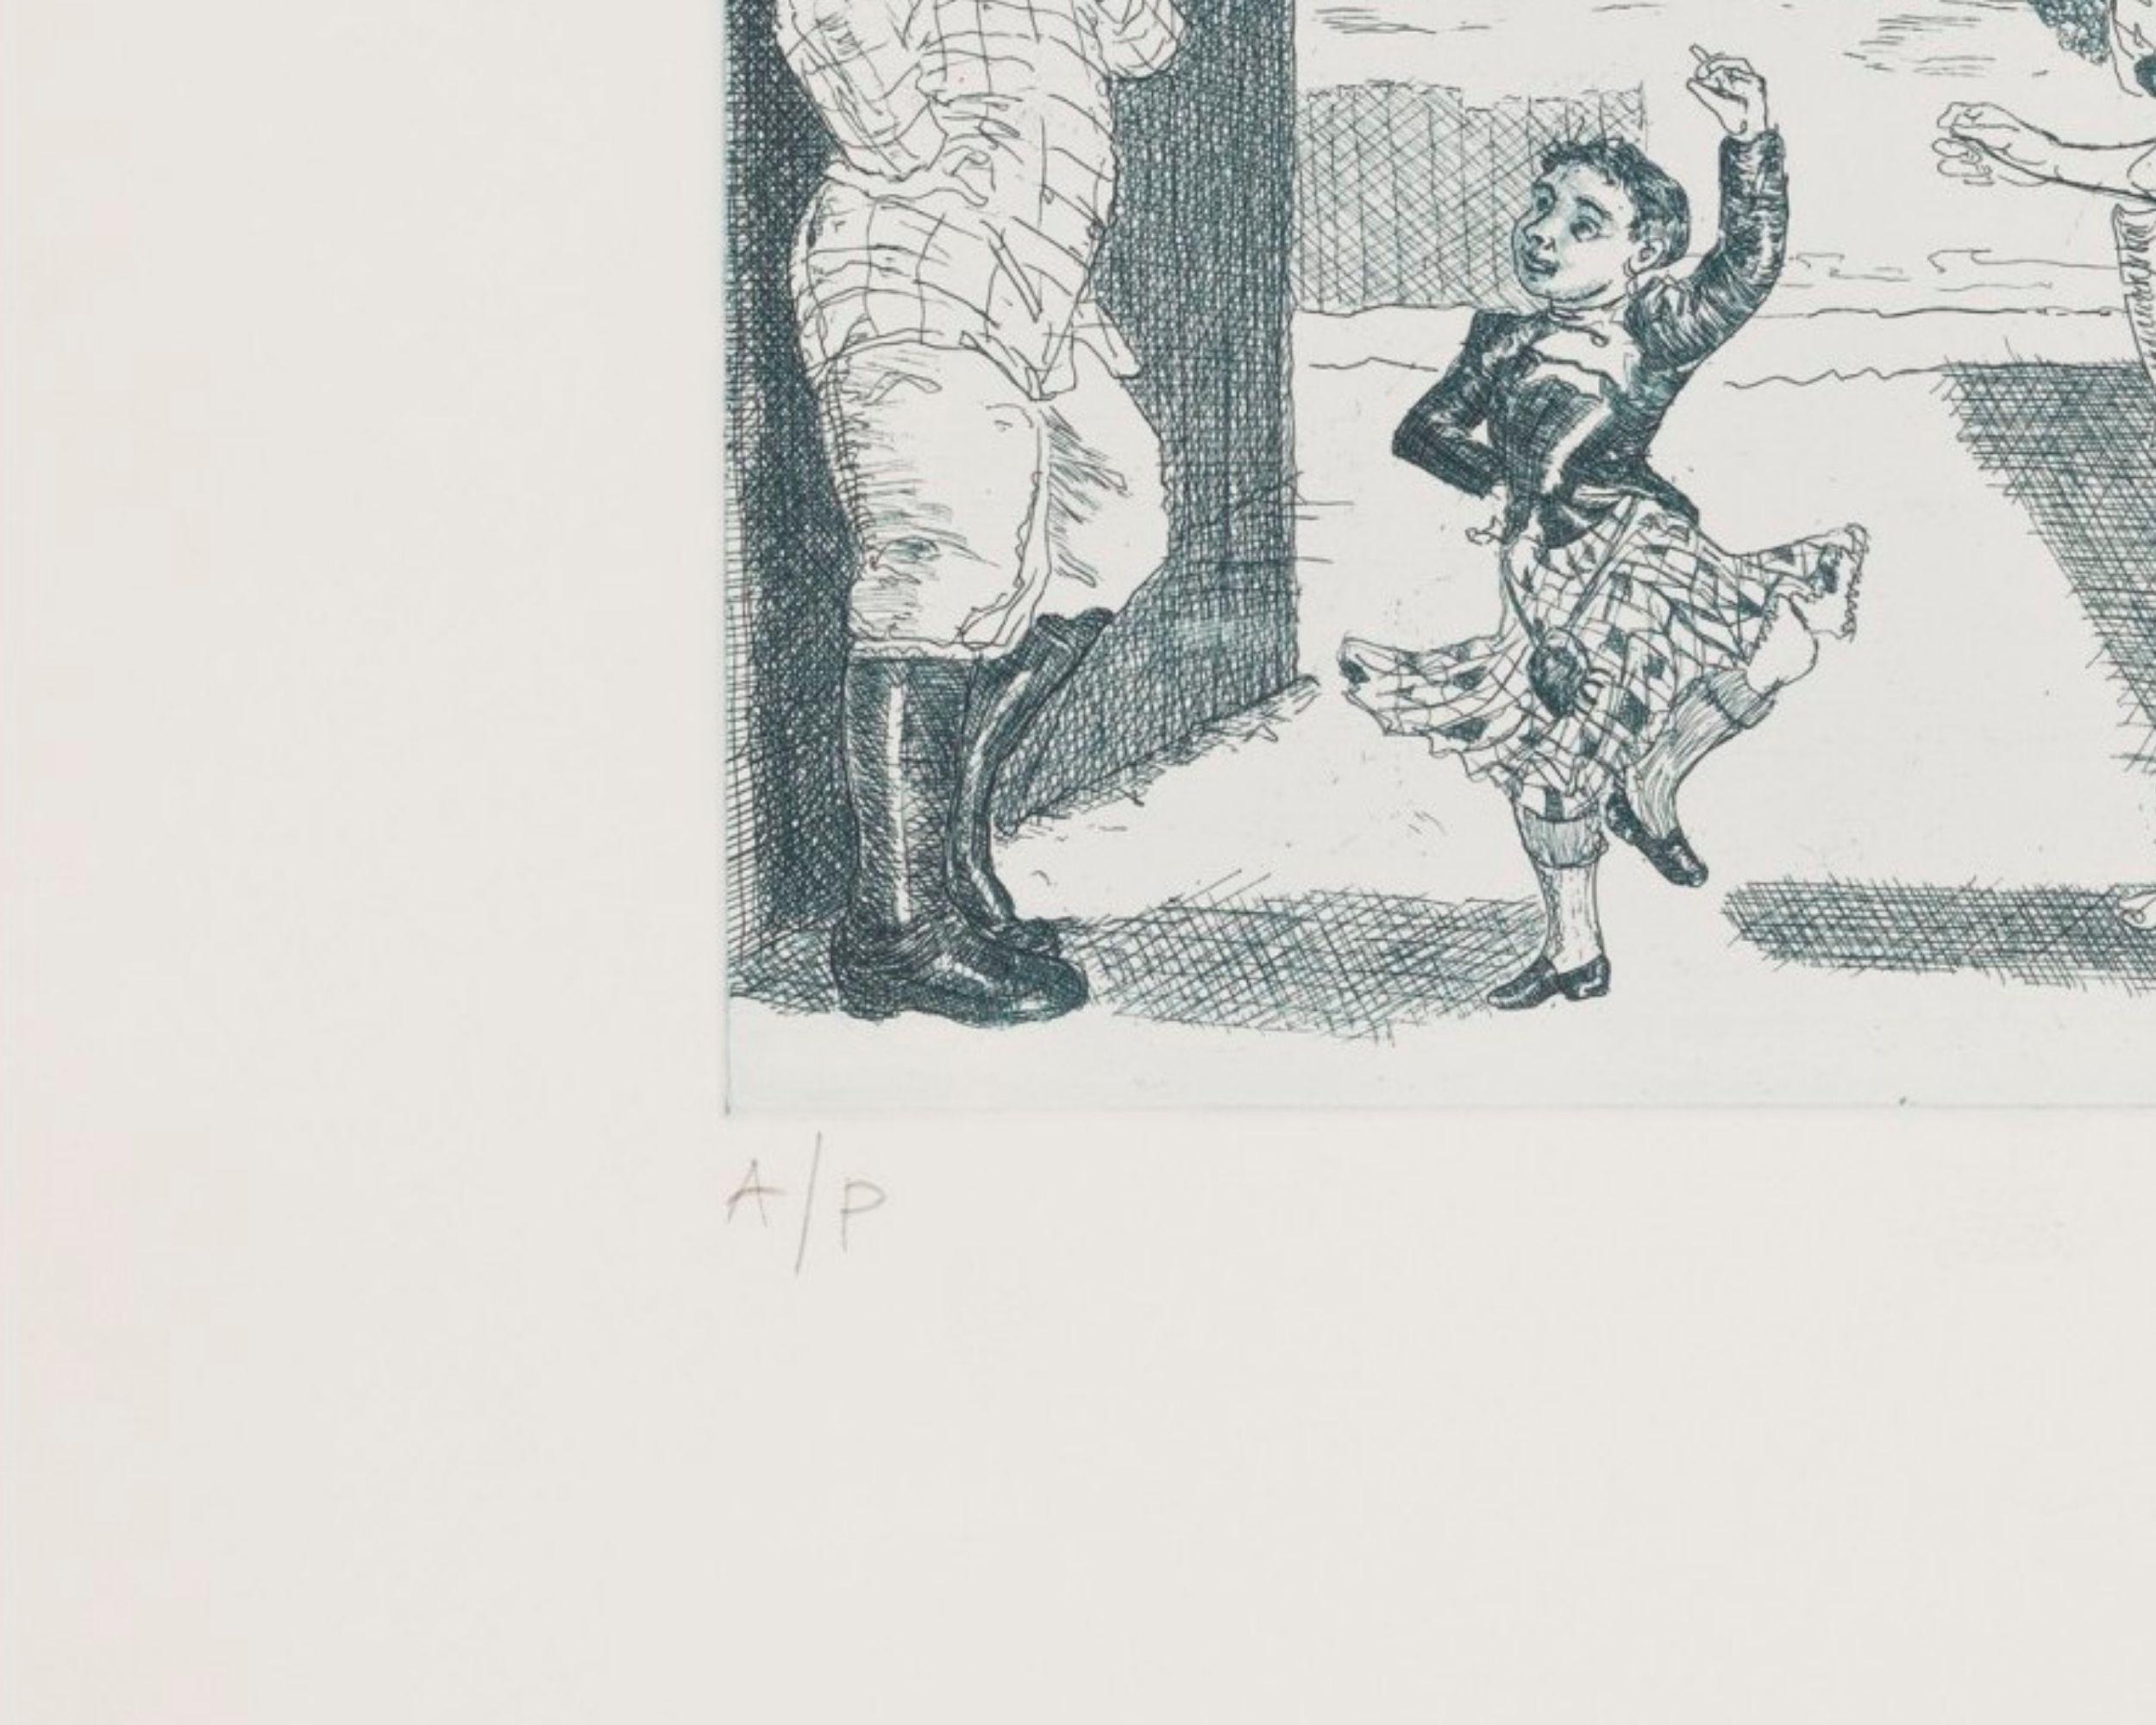 Dance to your Daddy, 1989
Paula Rego

Etching in colours, on velin Arches
Signed and inscribed 'A/P' in pencil
An artist’s proof aside from the edition of 50
From Nursery Rhymes
Printed by Culford Press, London
Co-published by the artist and